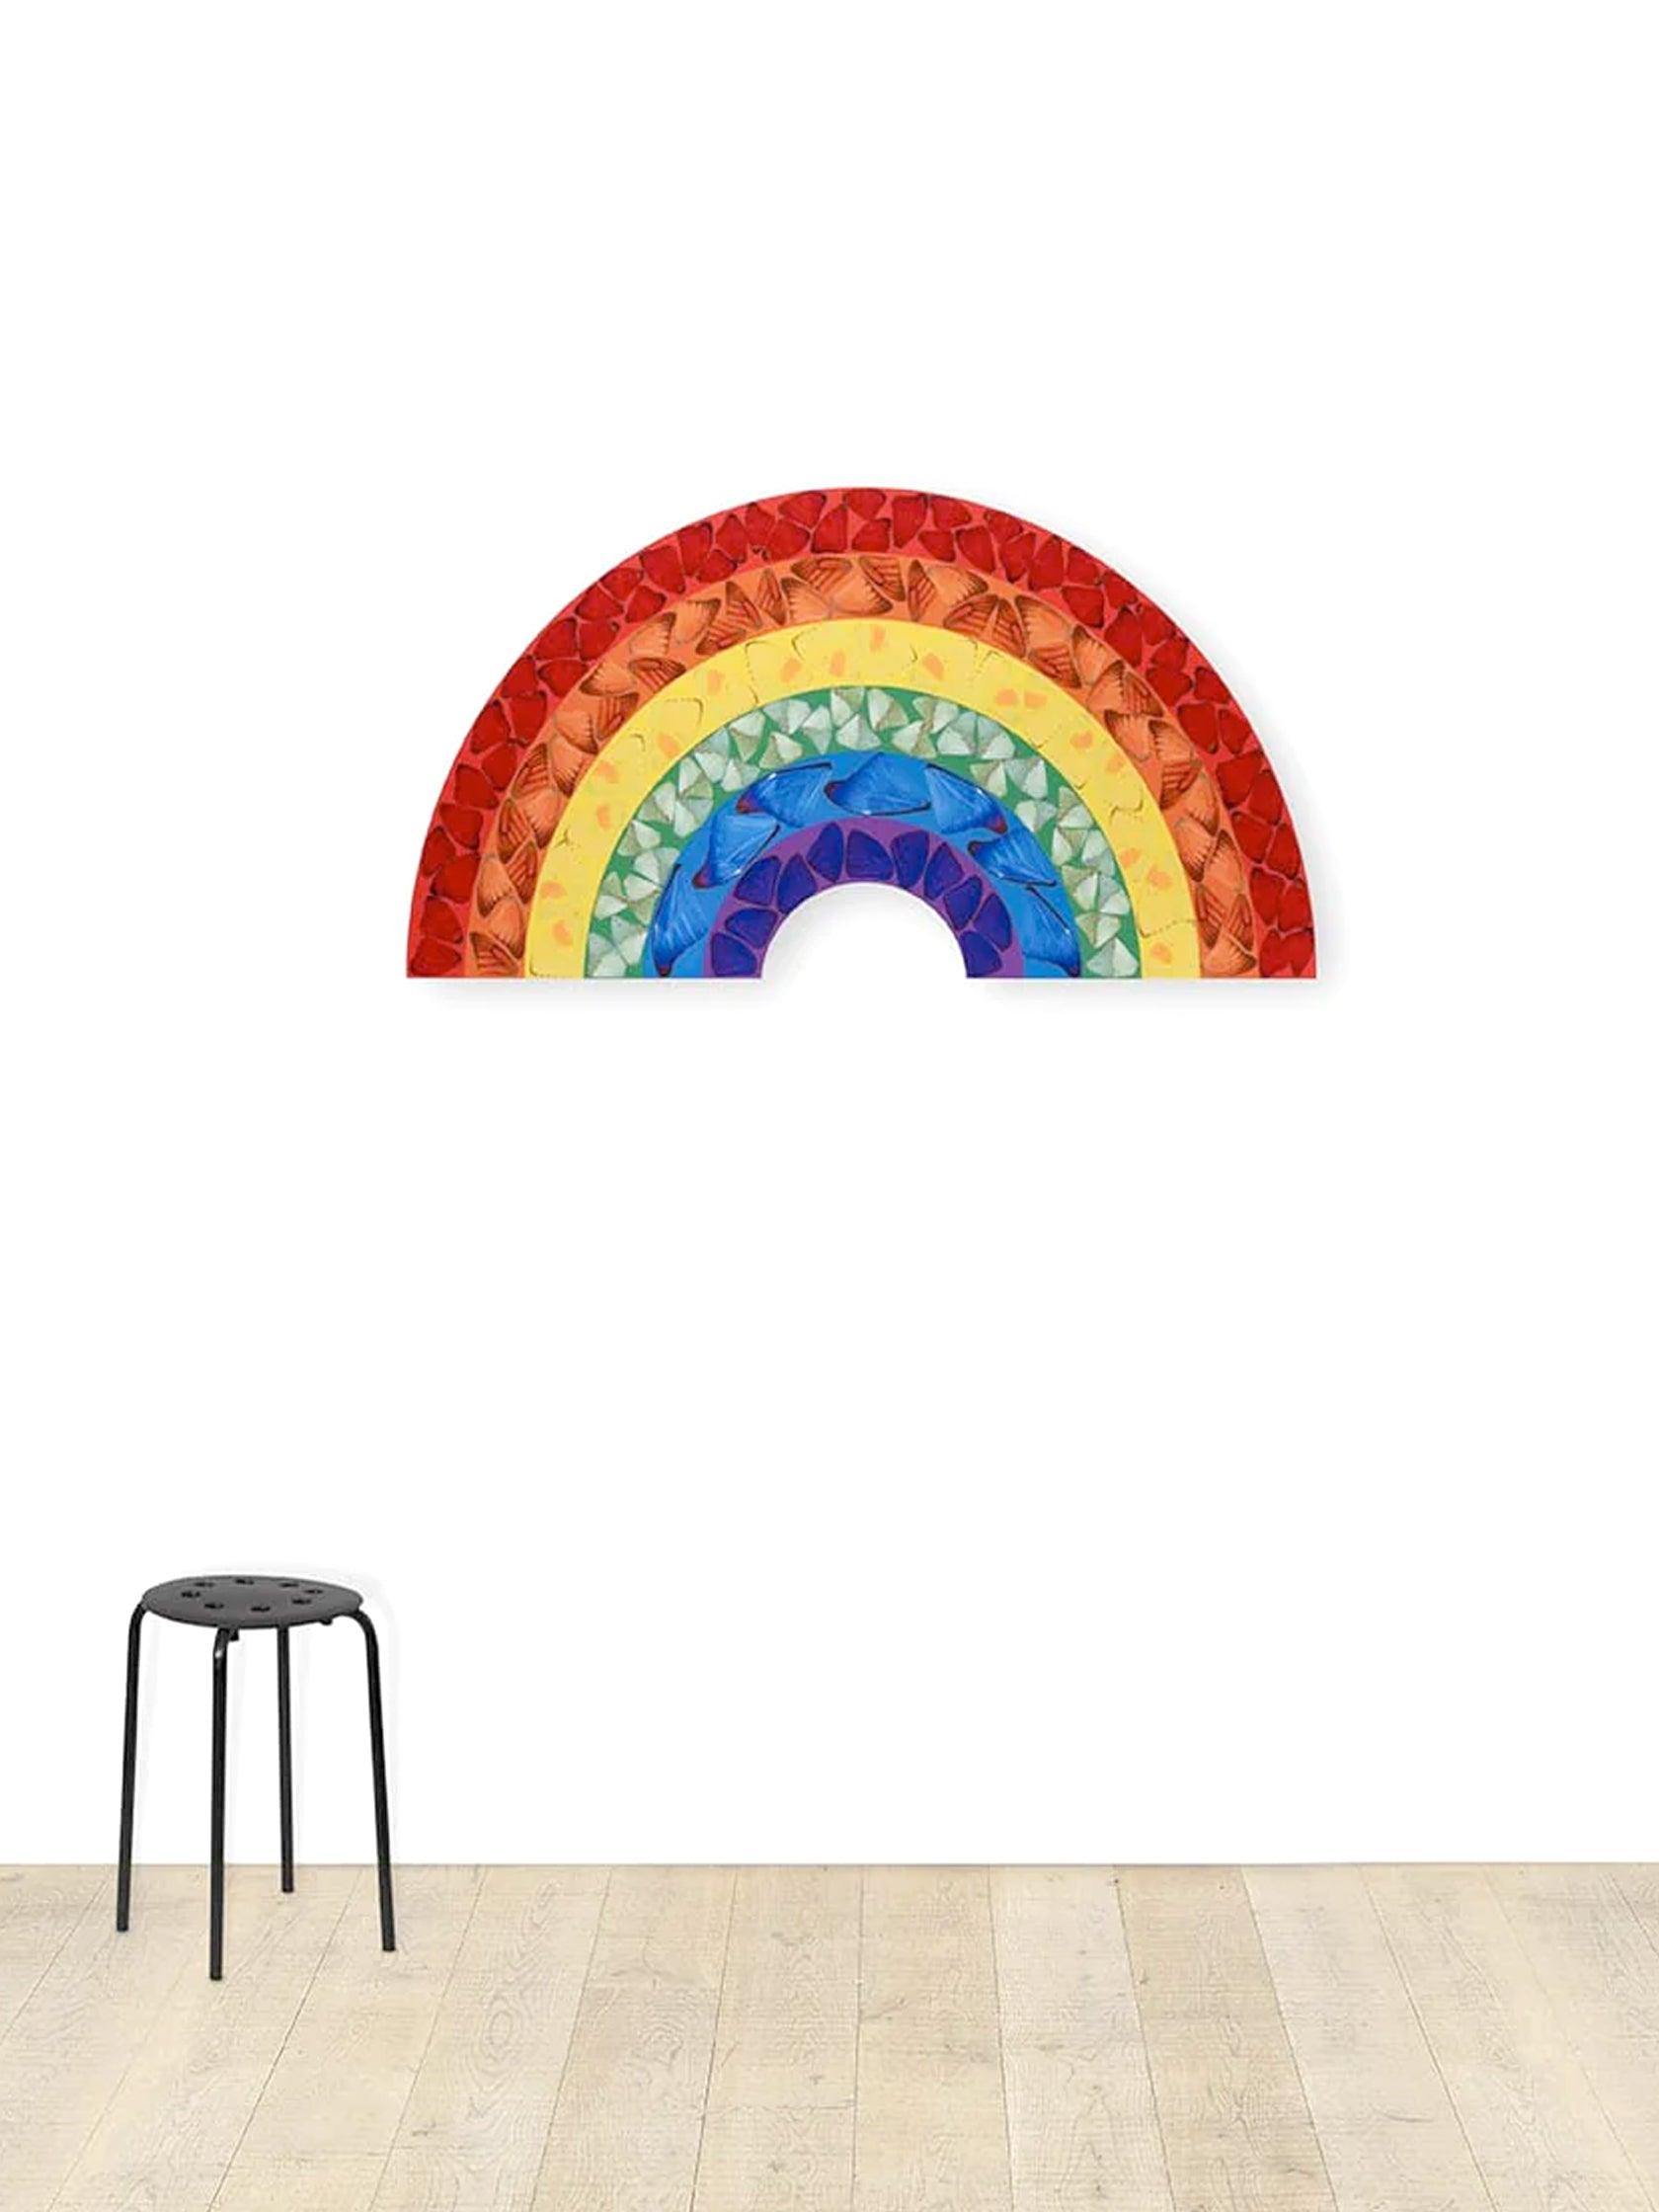 Butterfly Rainbow (Large) 953/1497 by Damien Hirst - Mankovsky Gallery